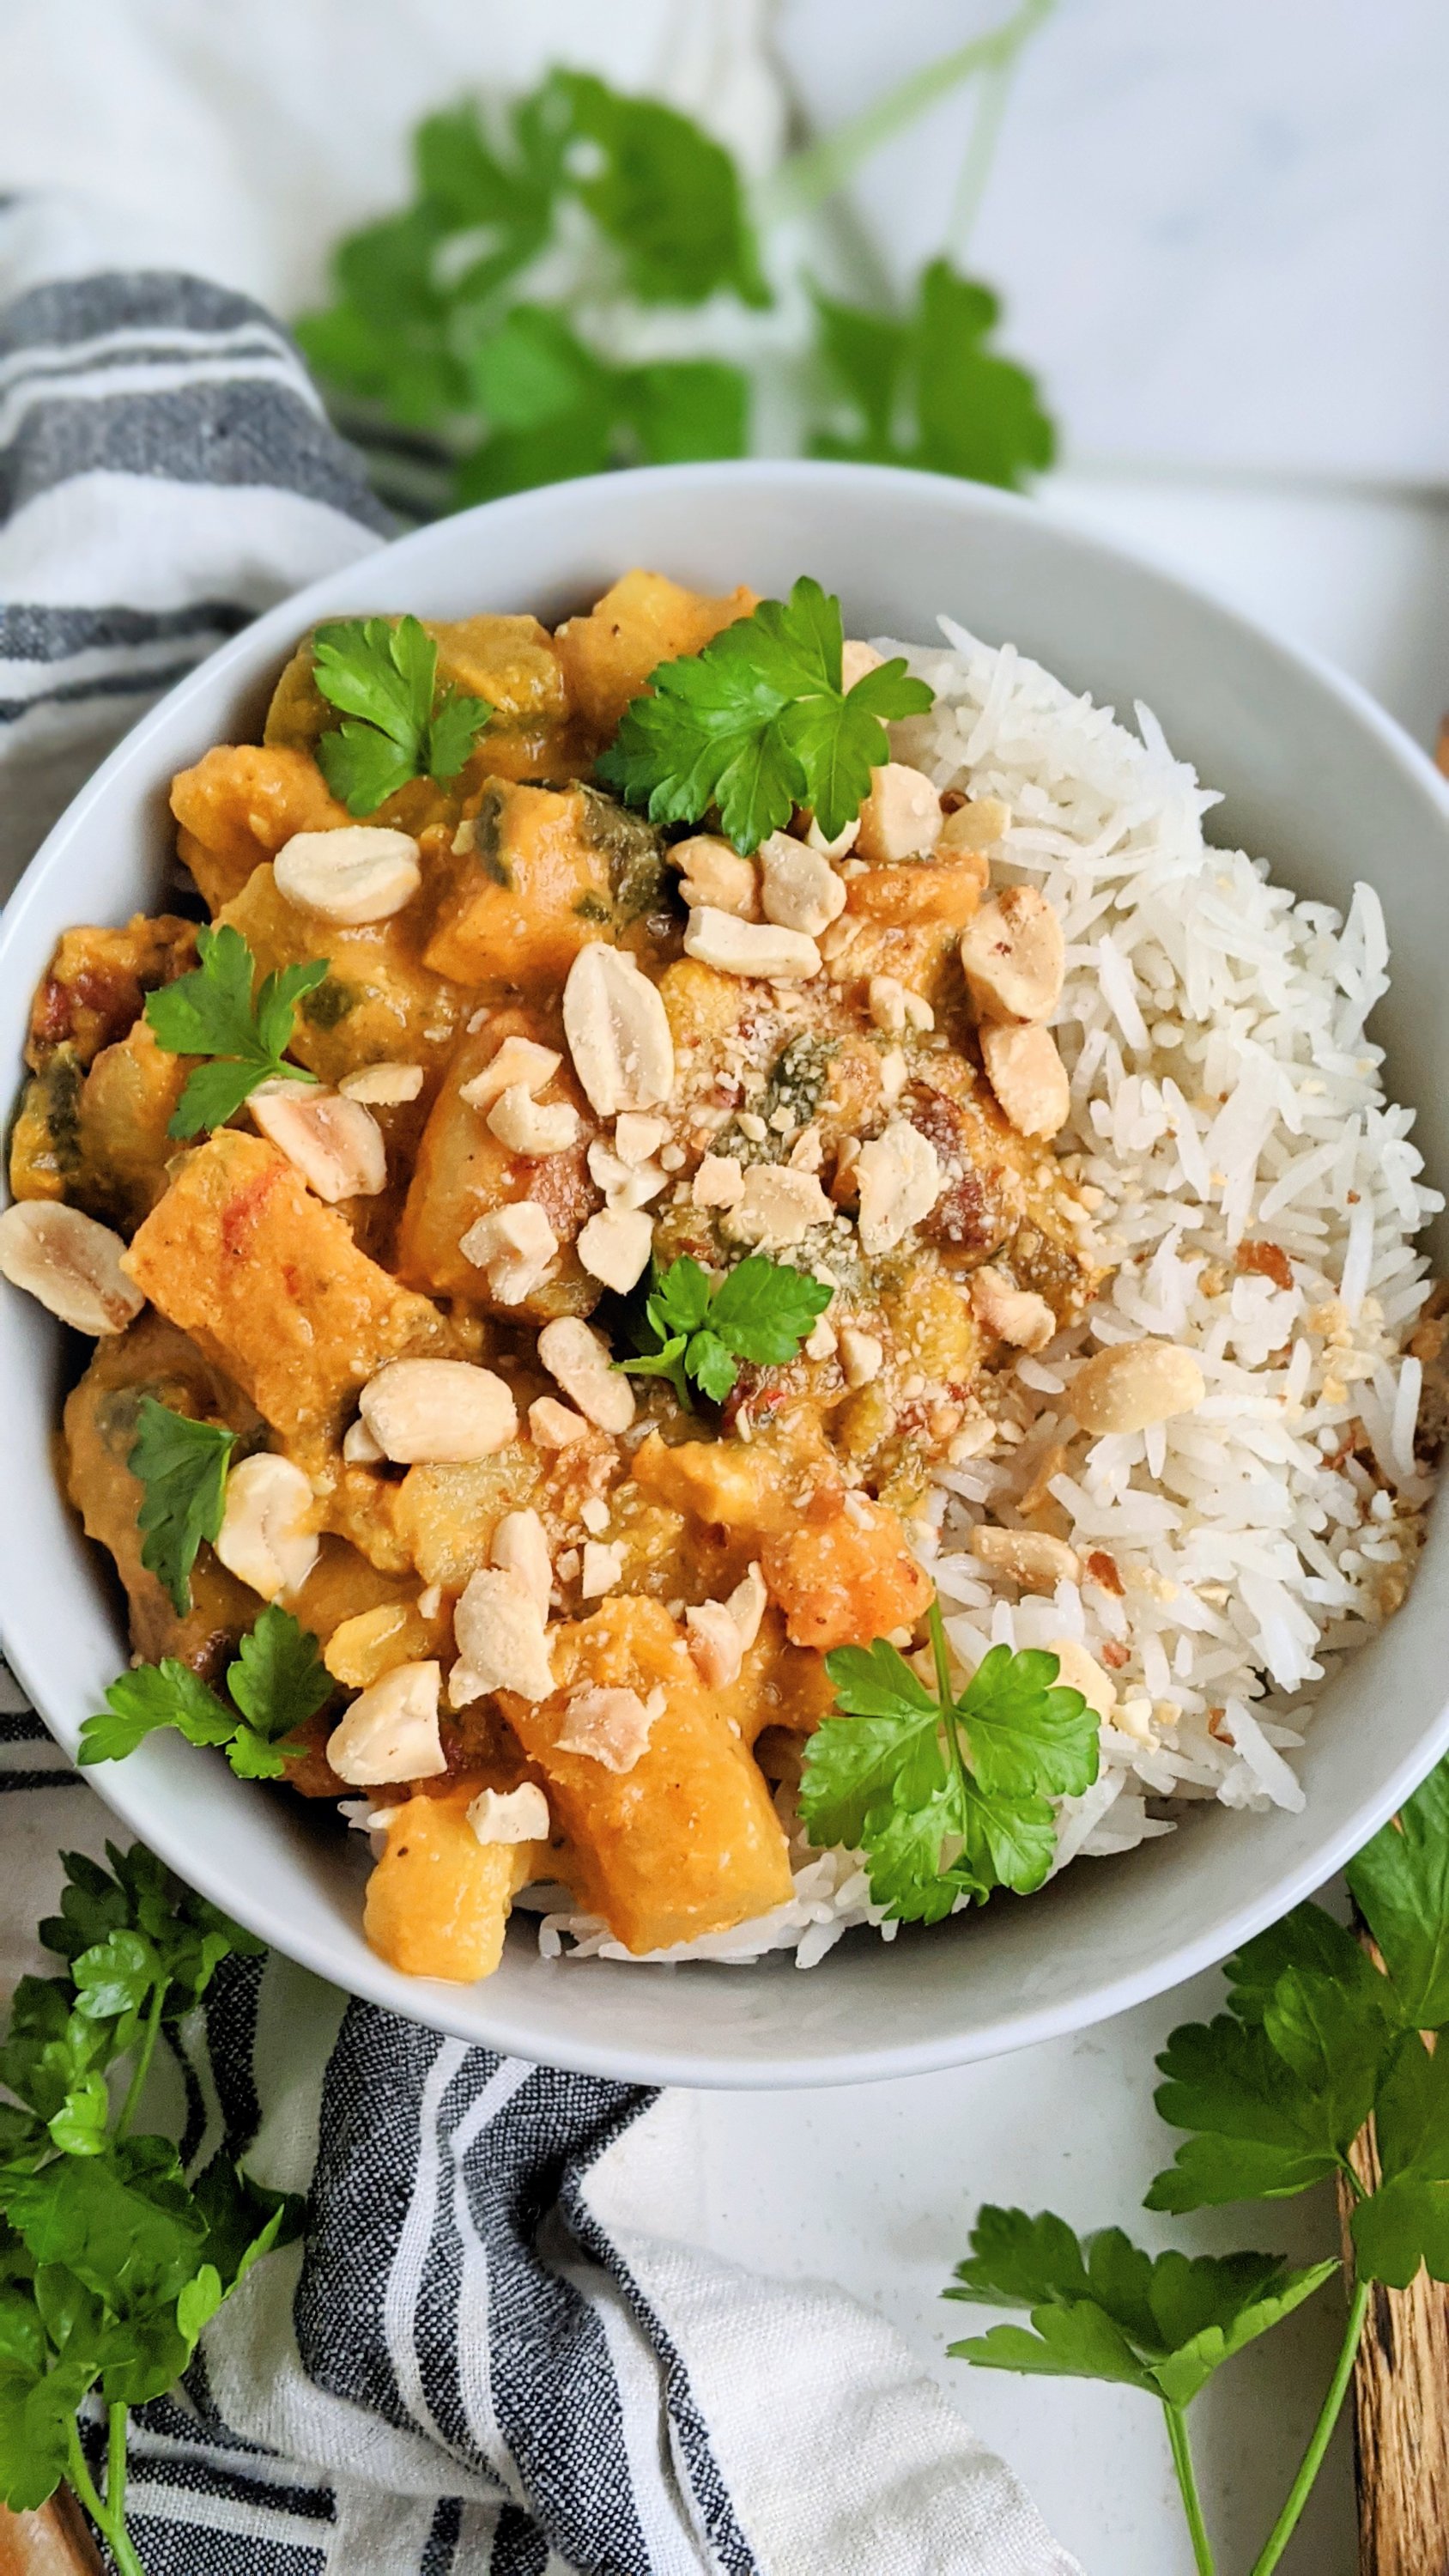 sweet potato peanut curry recipe vegan gluten free curries with nuts healthy homemade paleo whole30 recipes dinner